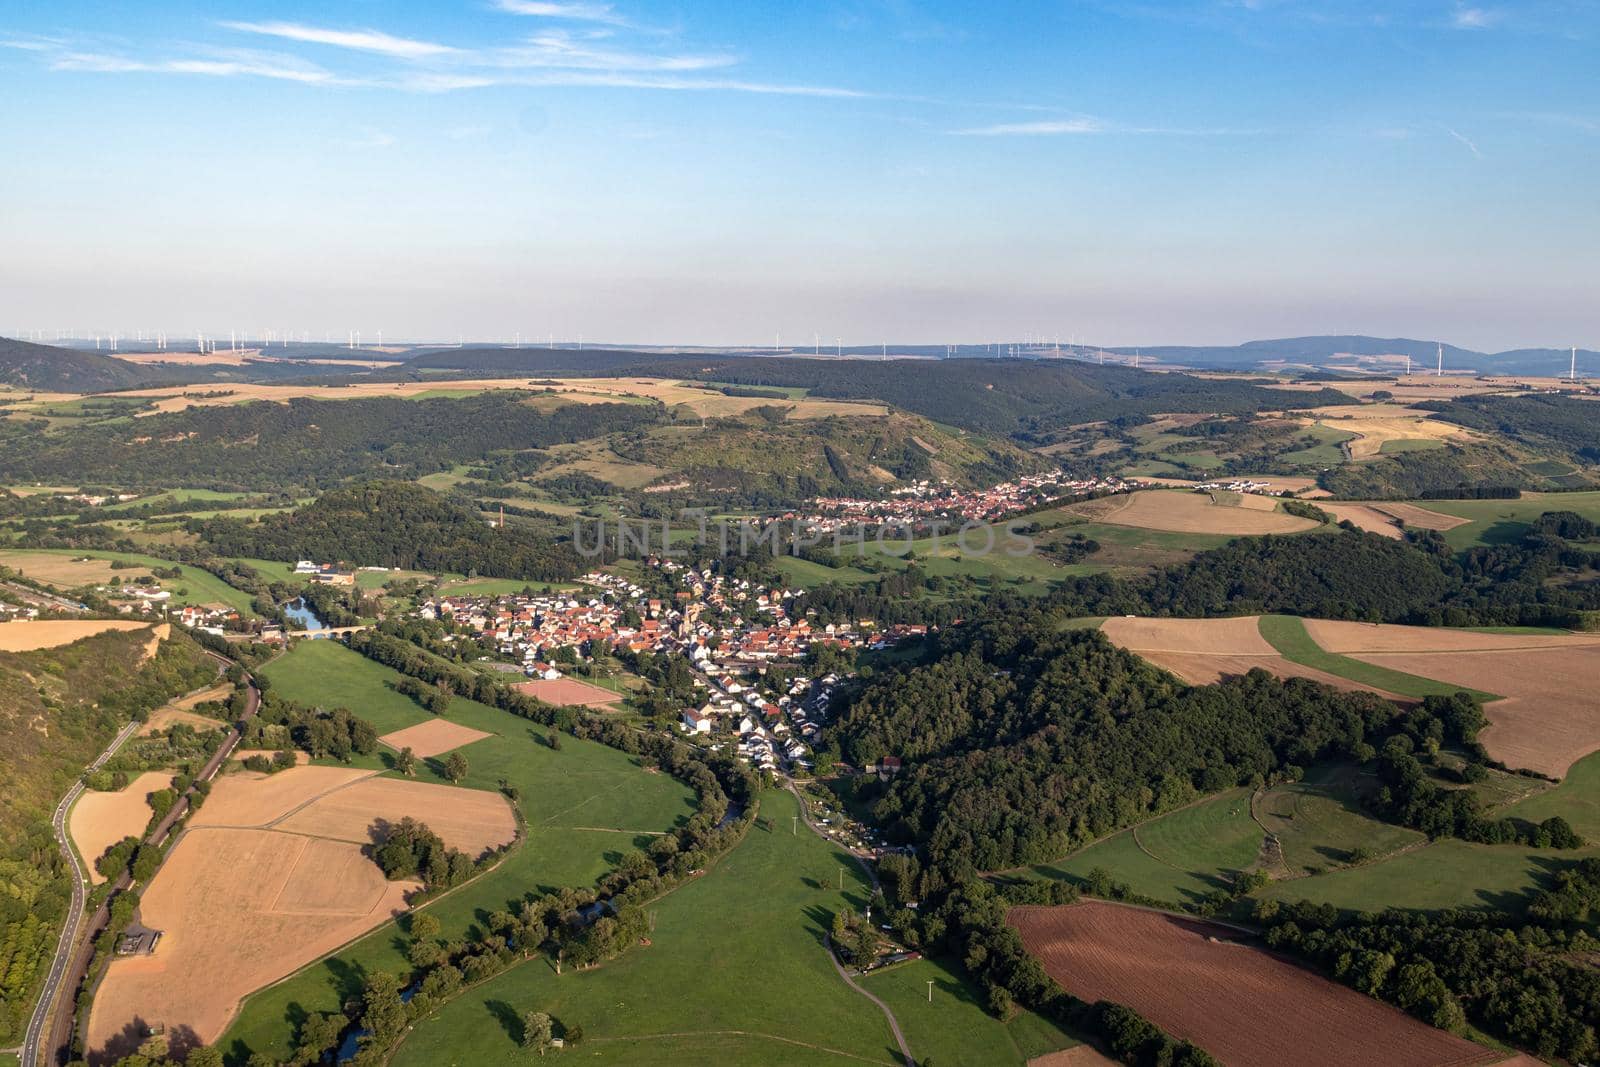 Aerial view at a landscape in Germany, Rhineland Palatinate near Bad Sobernheim with meadow, farmland, forest, hills, mountains 